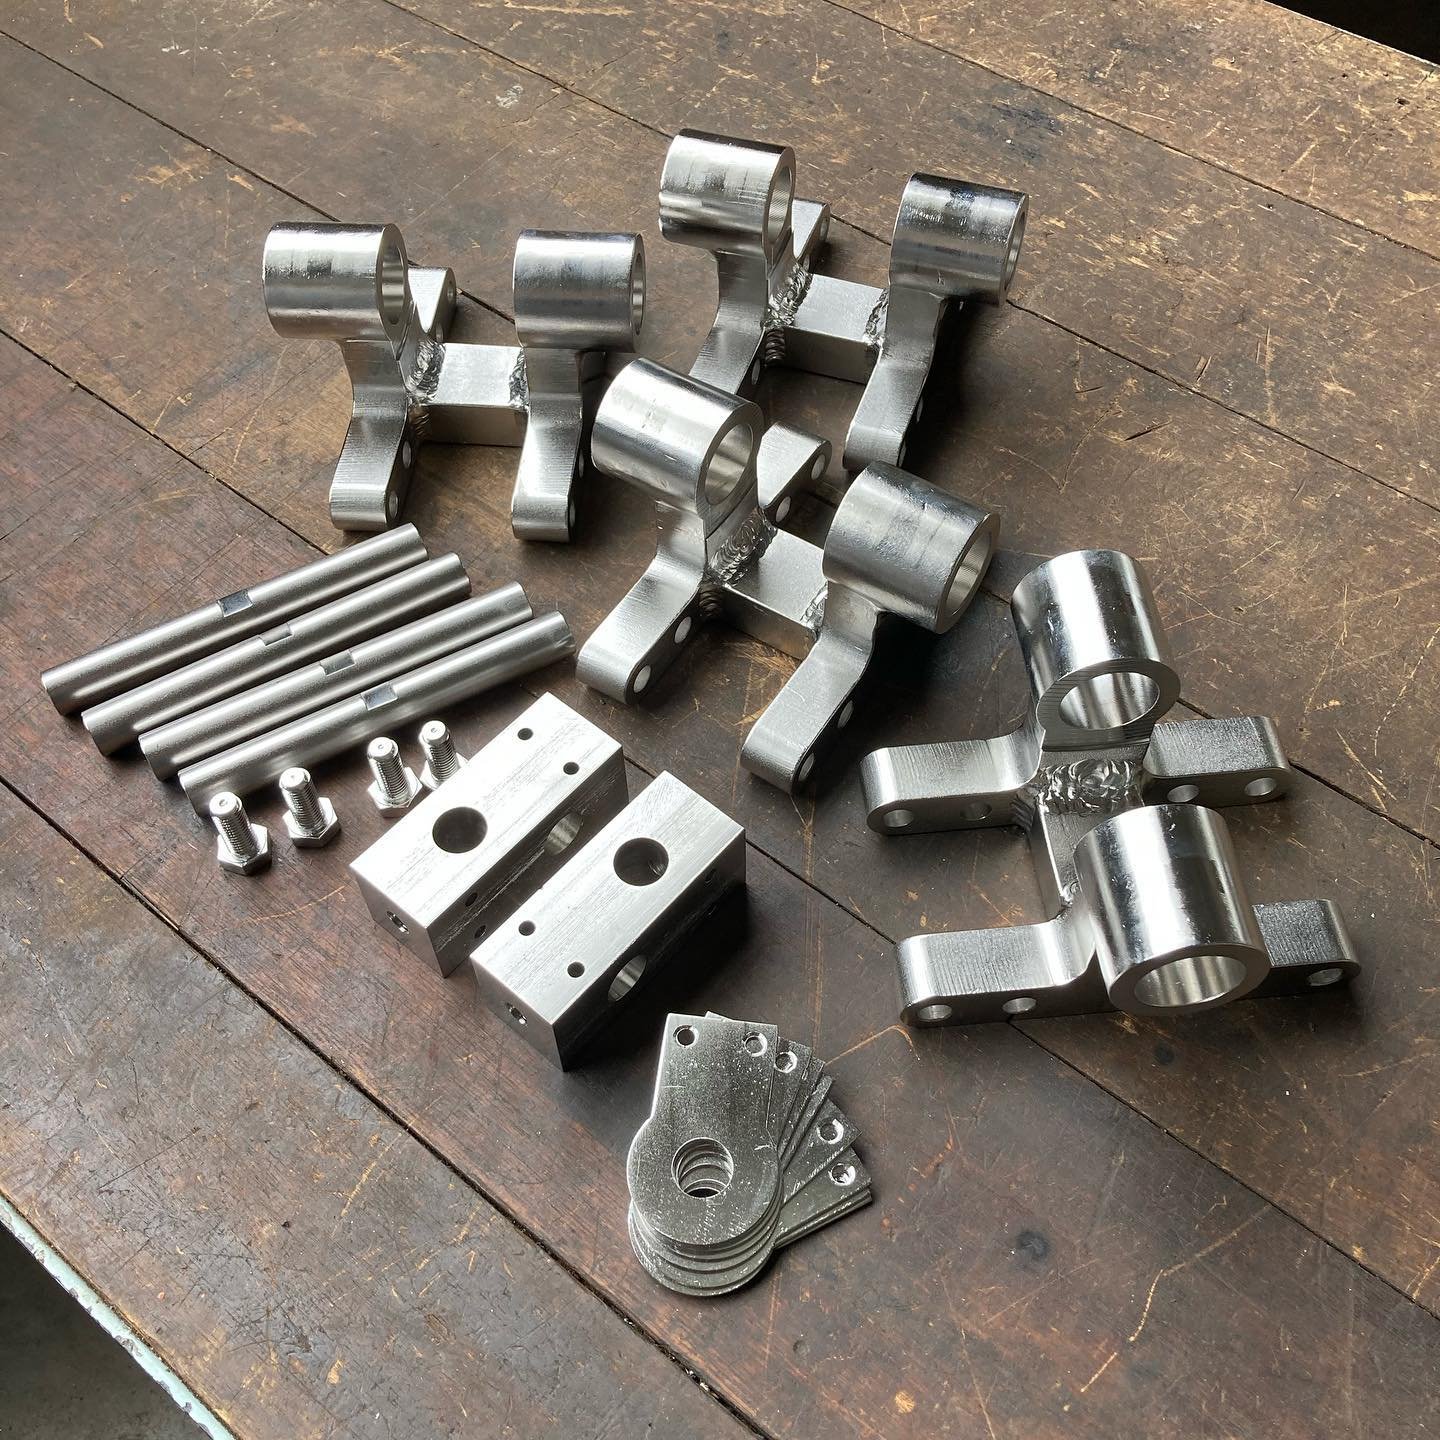 &lsquo;St Kilda&rsquo;s&rsquo; two universal joints are finished, electropolished and ready to assemble, once I receive some obscenely expensive and hopefully very long lasting bronze bushes. These custom made bushes, plugged with PTFE, are an underw